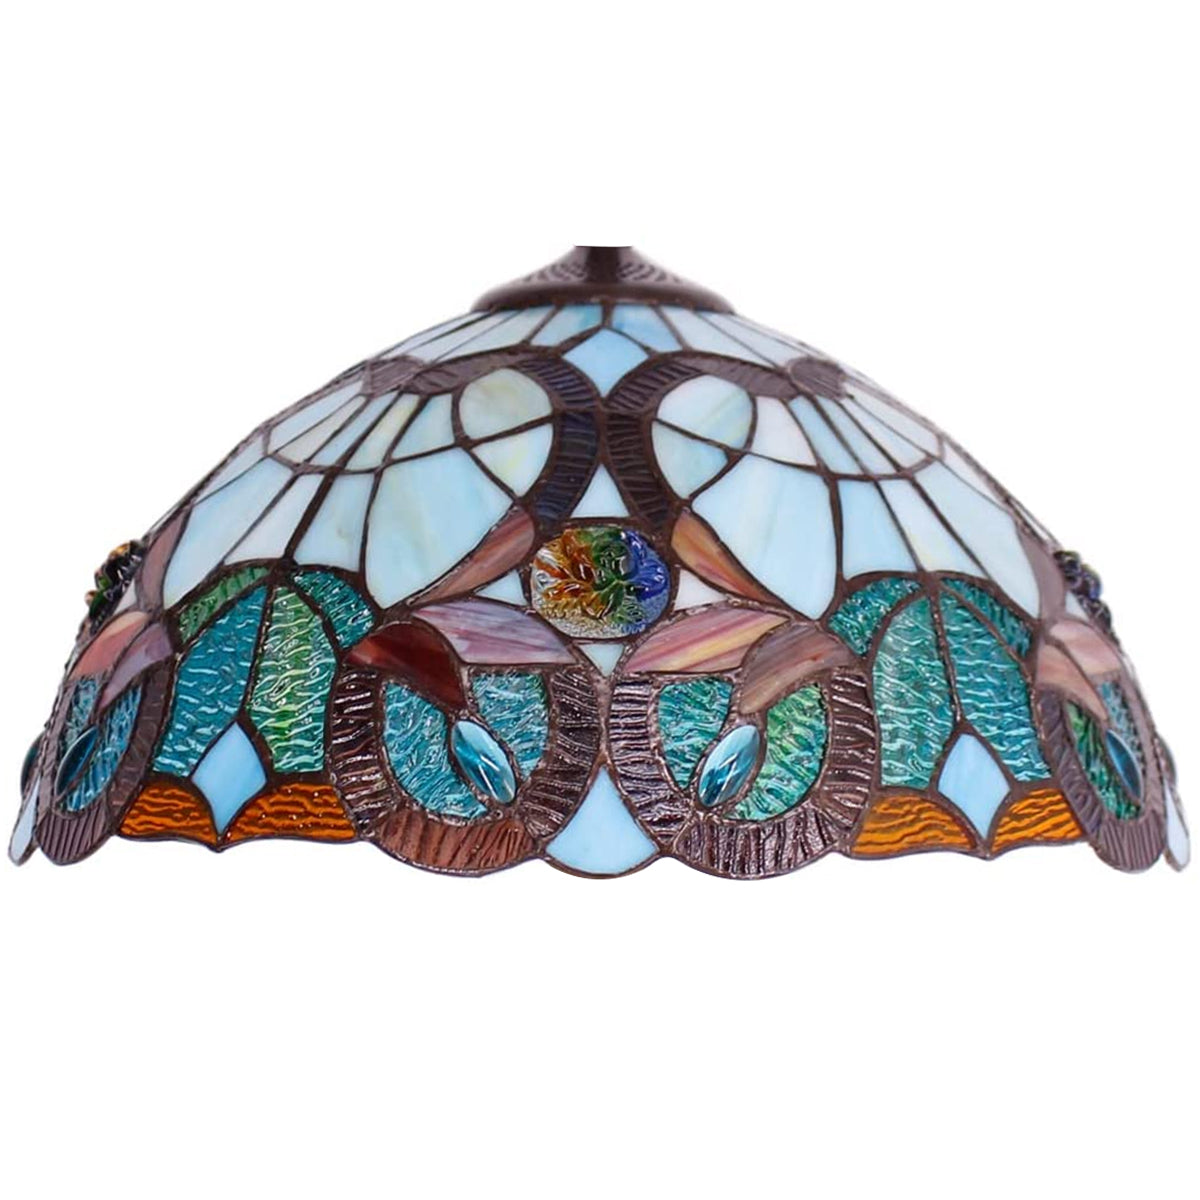 Tiffany Lampshade Replacement Werfactory® W16H7-inch Traditional Large Turquoise Teal Green BlueStained Glass Style Shade